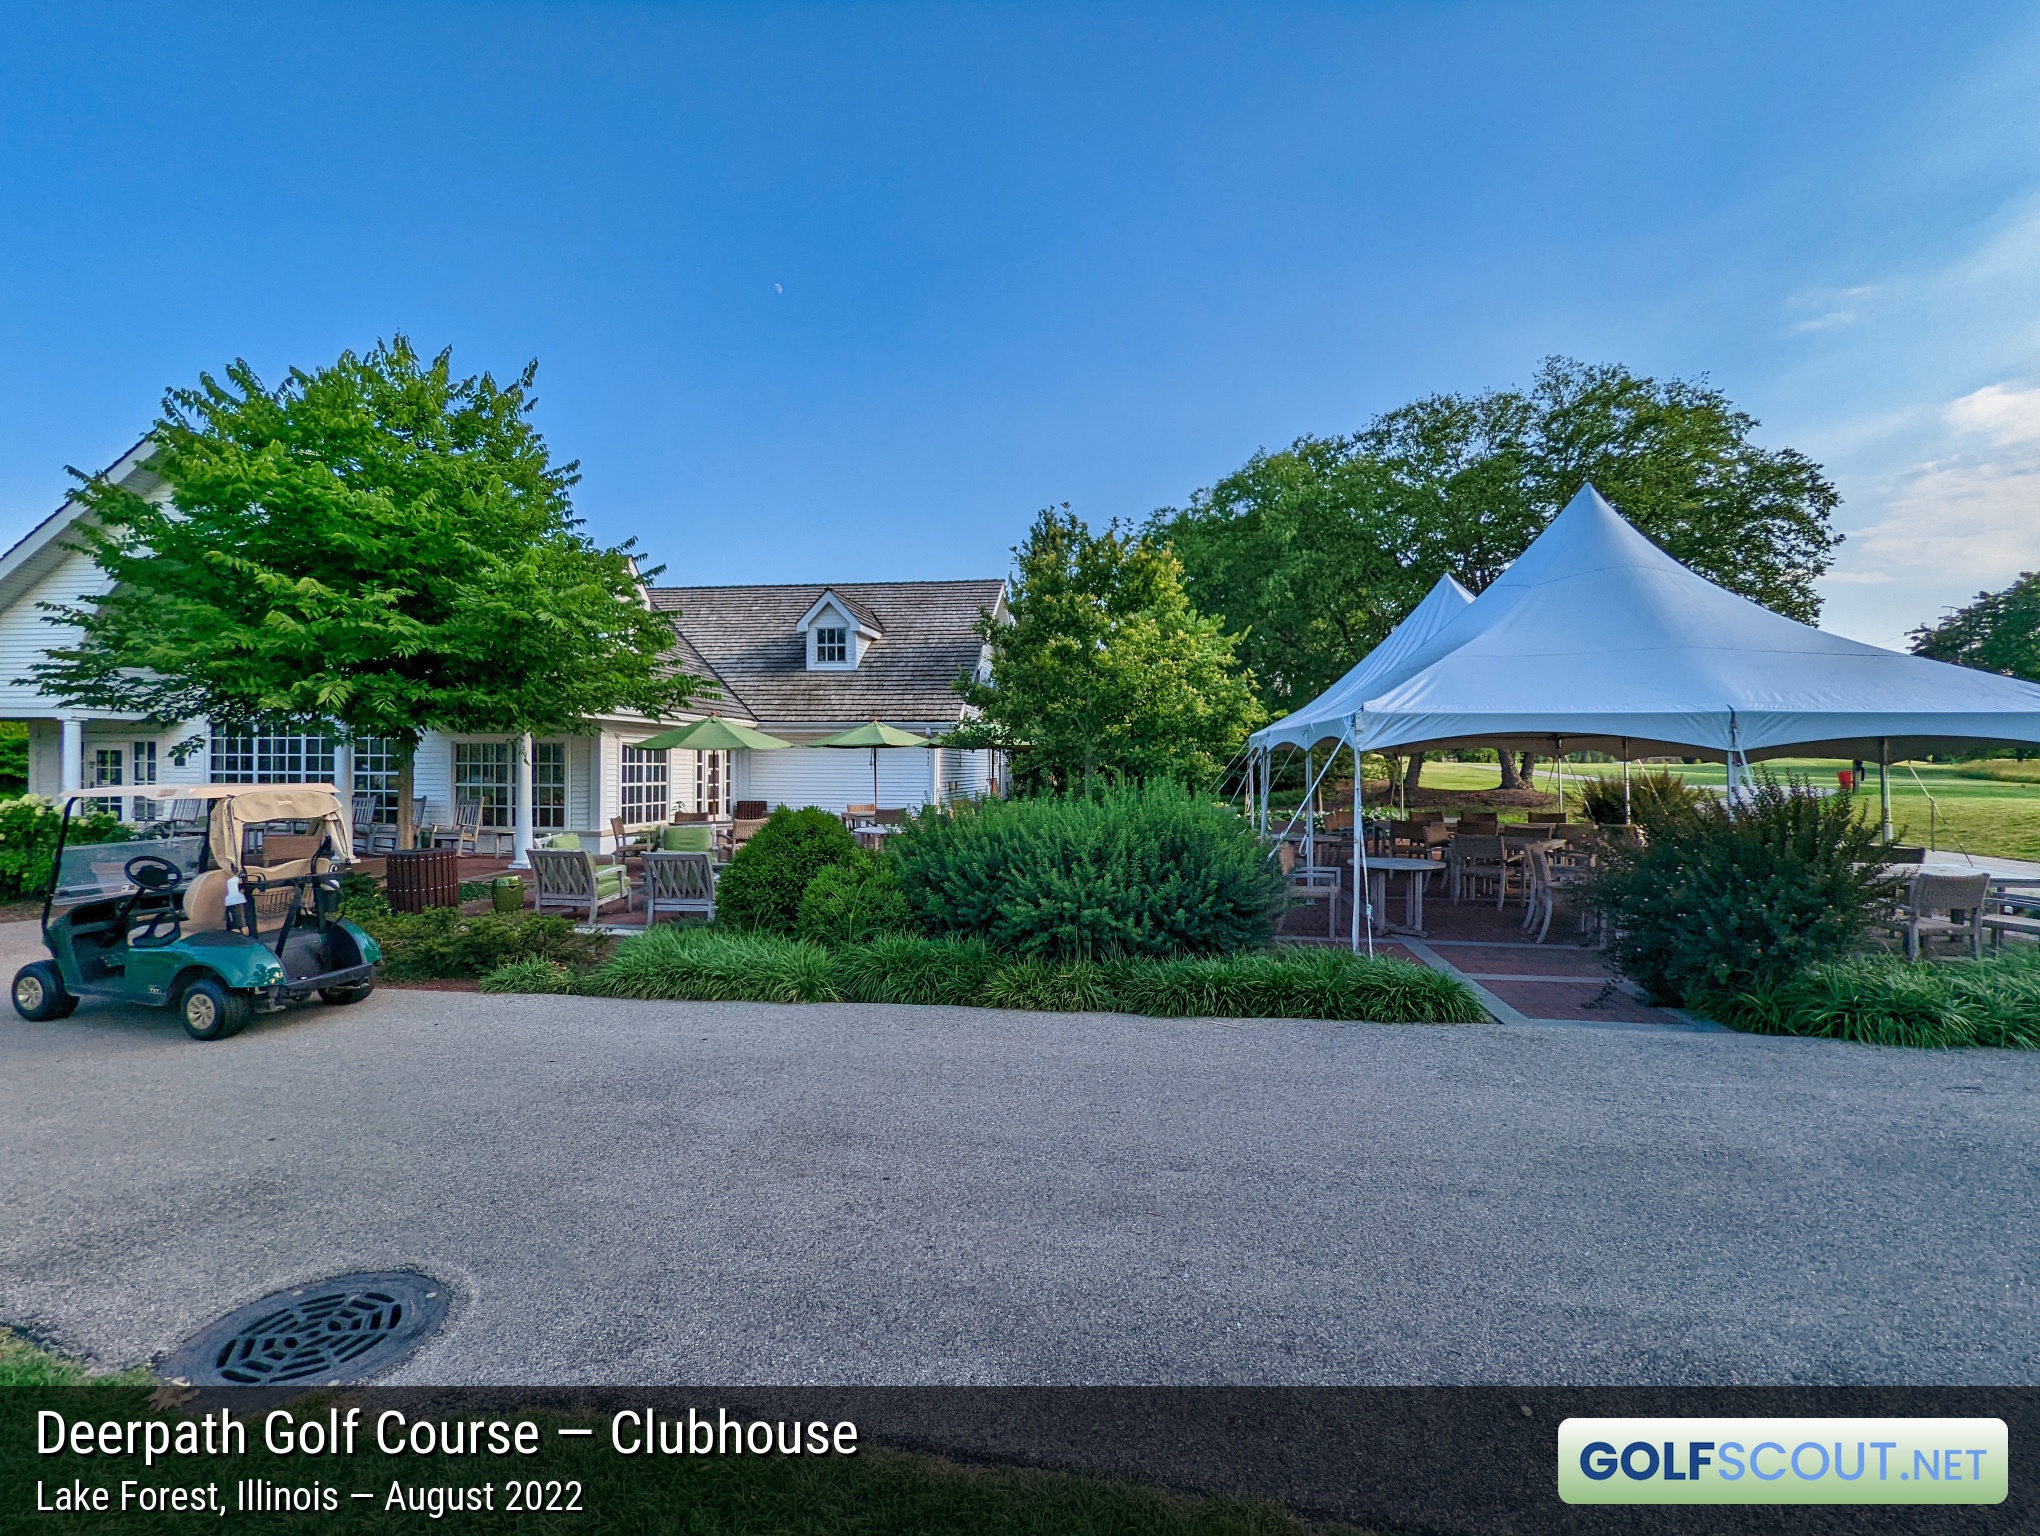 Photo of the clubhouse at Deerpath Golf Course in Lake Forest, Illinois. 